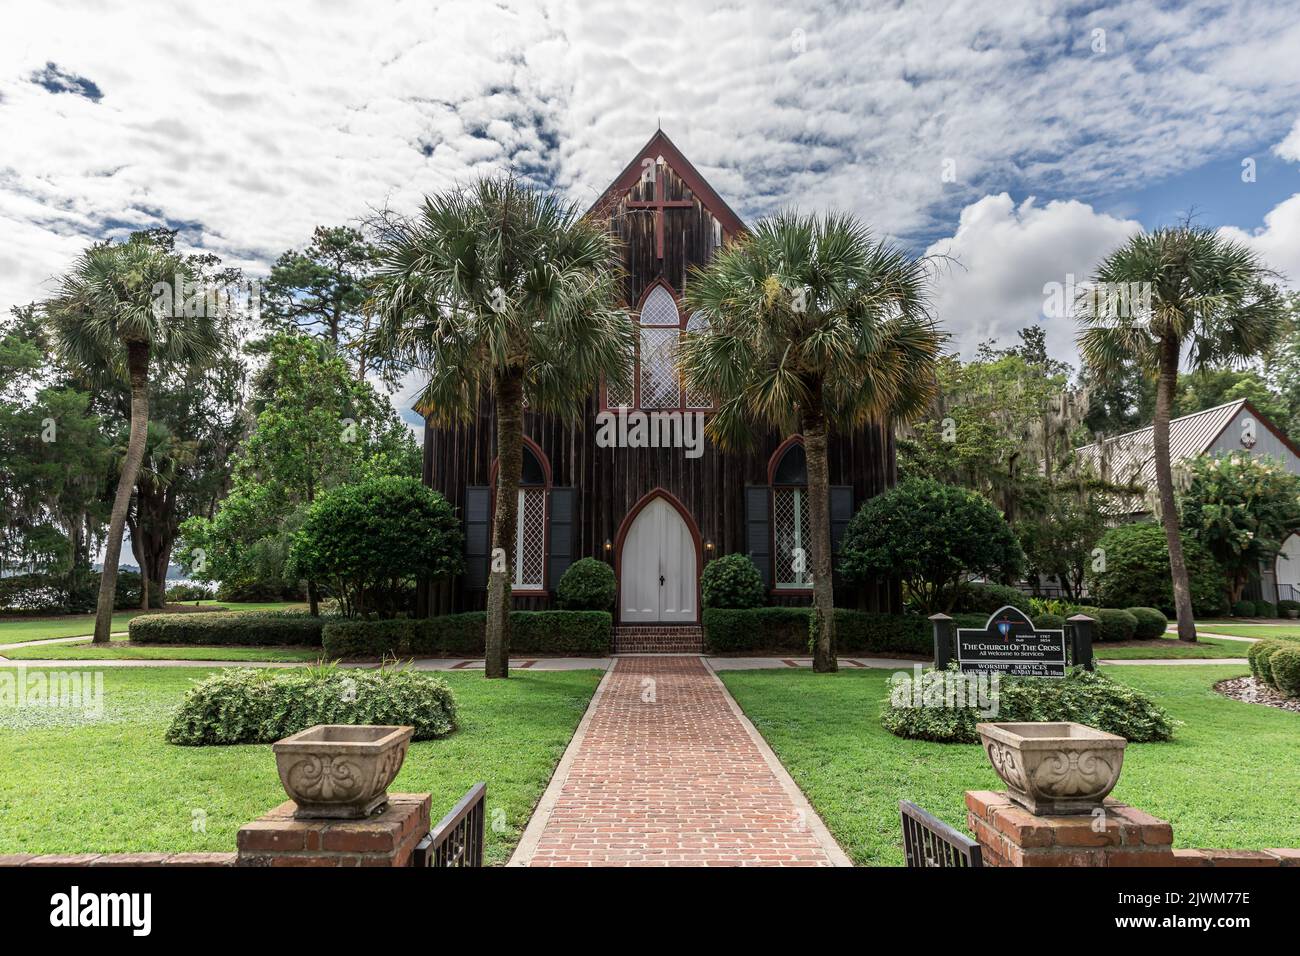 The historic Church of the Cross in Bluffton, South Carolina during the day. Stock Photo